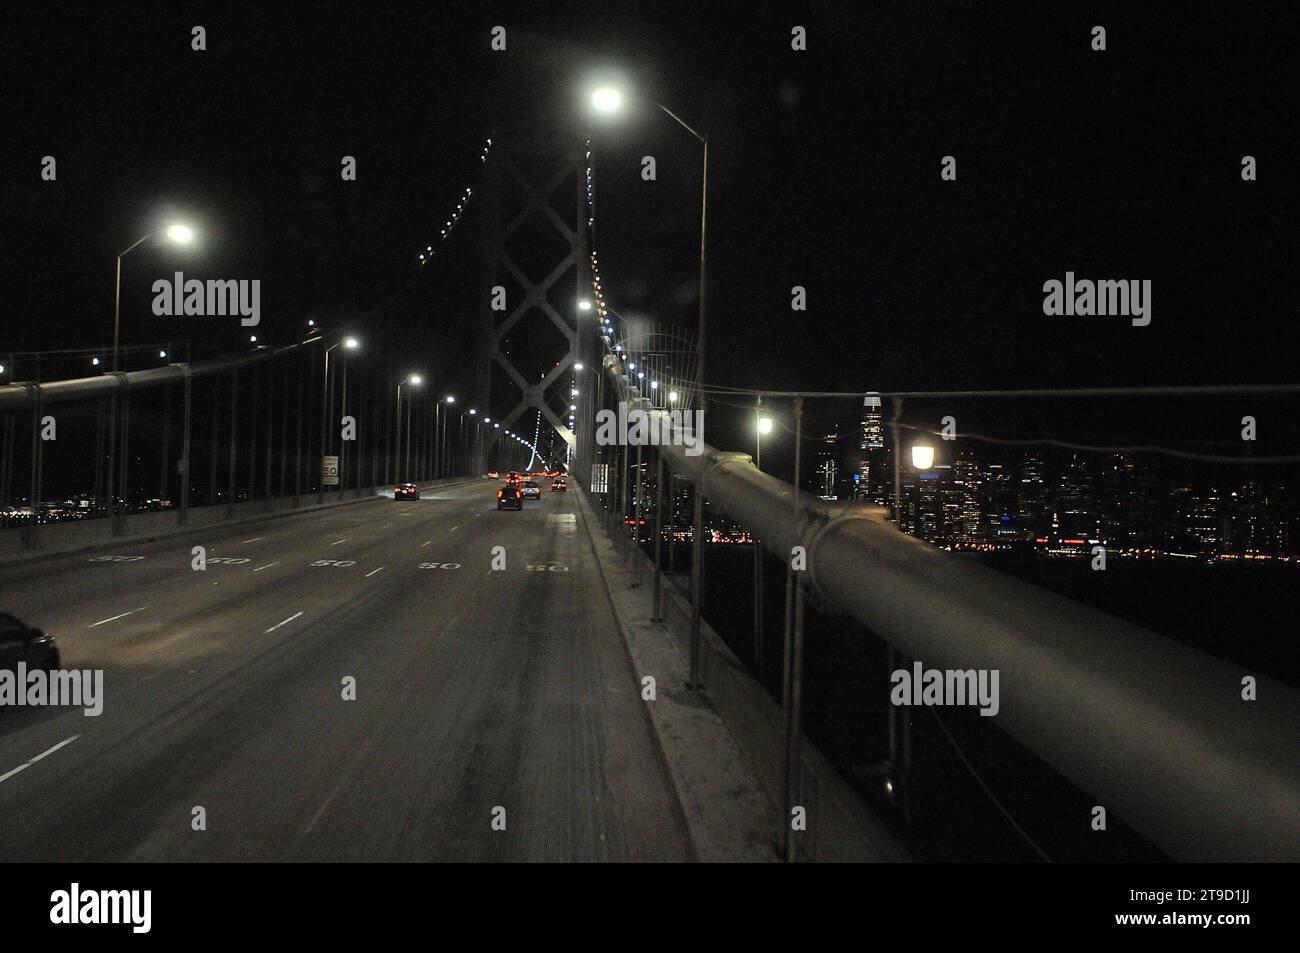 Treasure Island San Francisco /Bay Brige /california/ 12 septembre 2019/San Francisco City by Night Lights and View from Bay Bridge . Photo.Francis Dean/Deanpictures. Crédit : Imago/Alamy Live News Banque D'Images